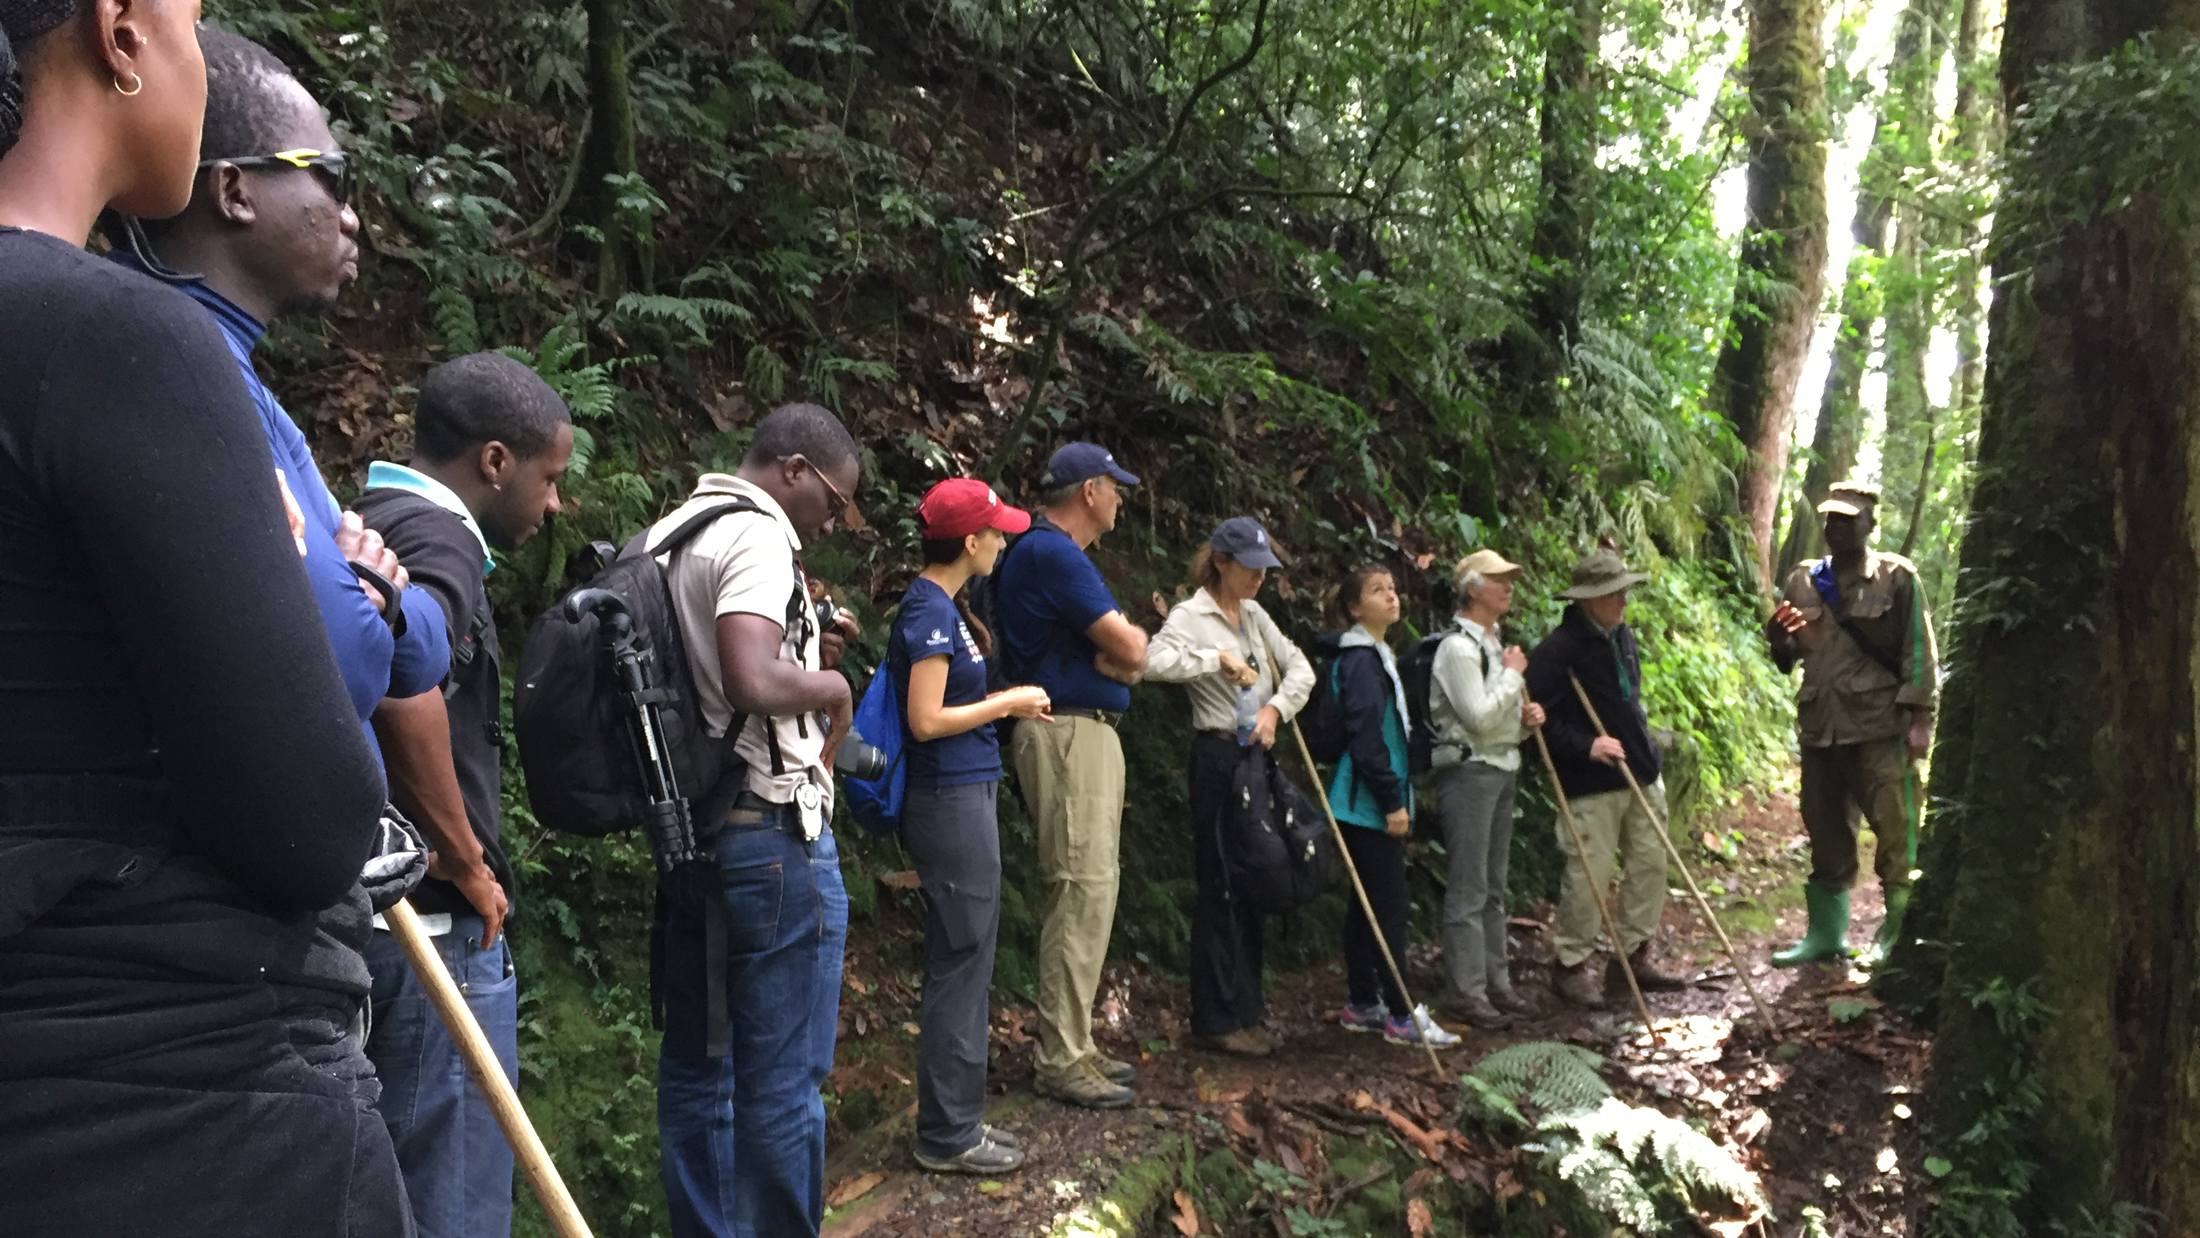 Rwandan and foreign tourists enjoy a guided tour of the pristine montane rainforest of Nyungwe National Park. Photo © Jensen Montambault/SNAPP/The Nature Conservancy